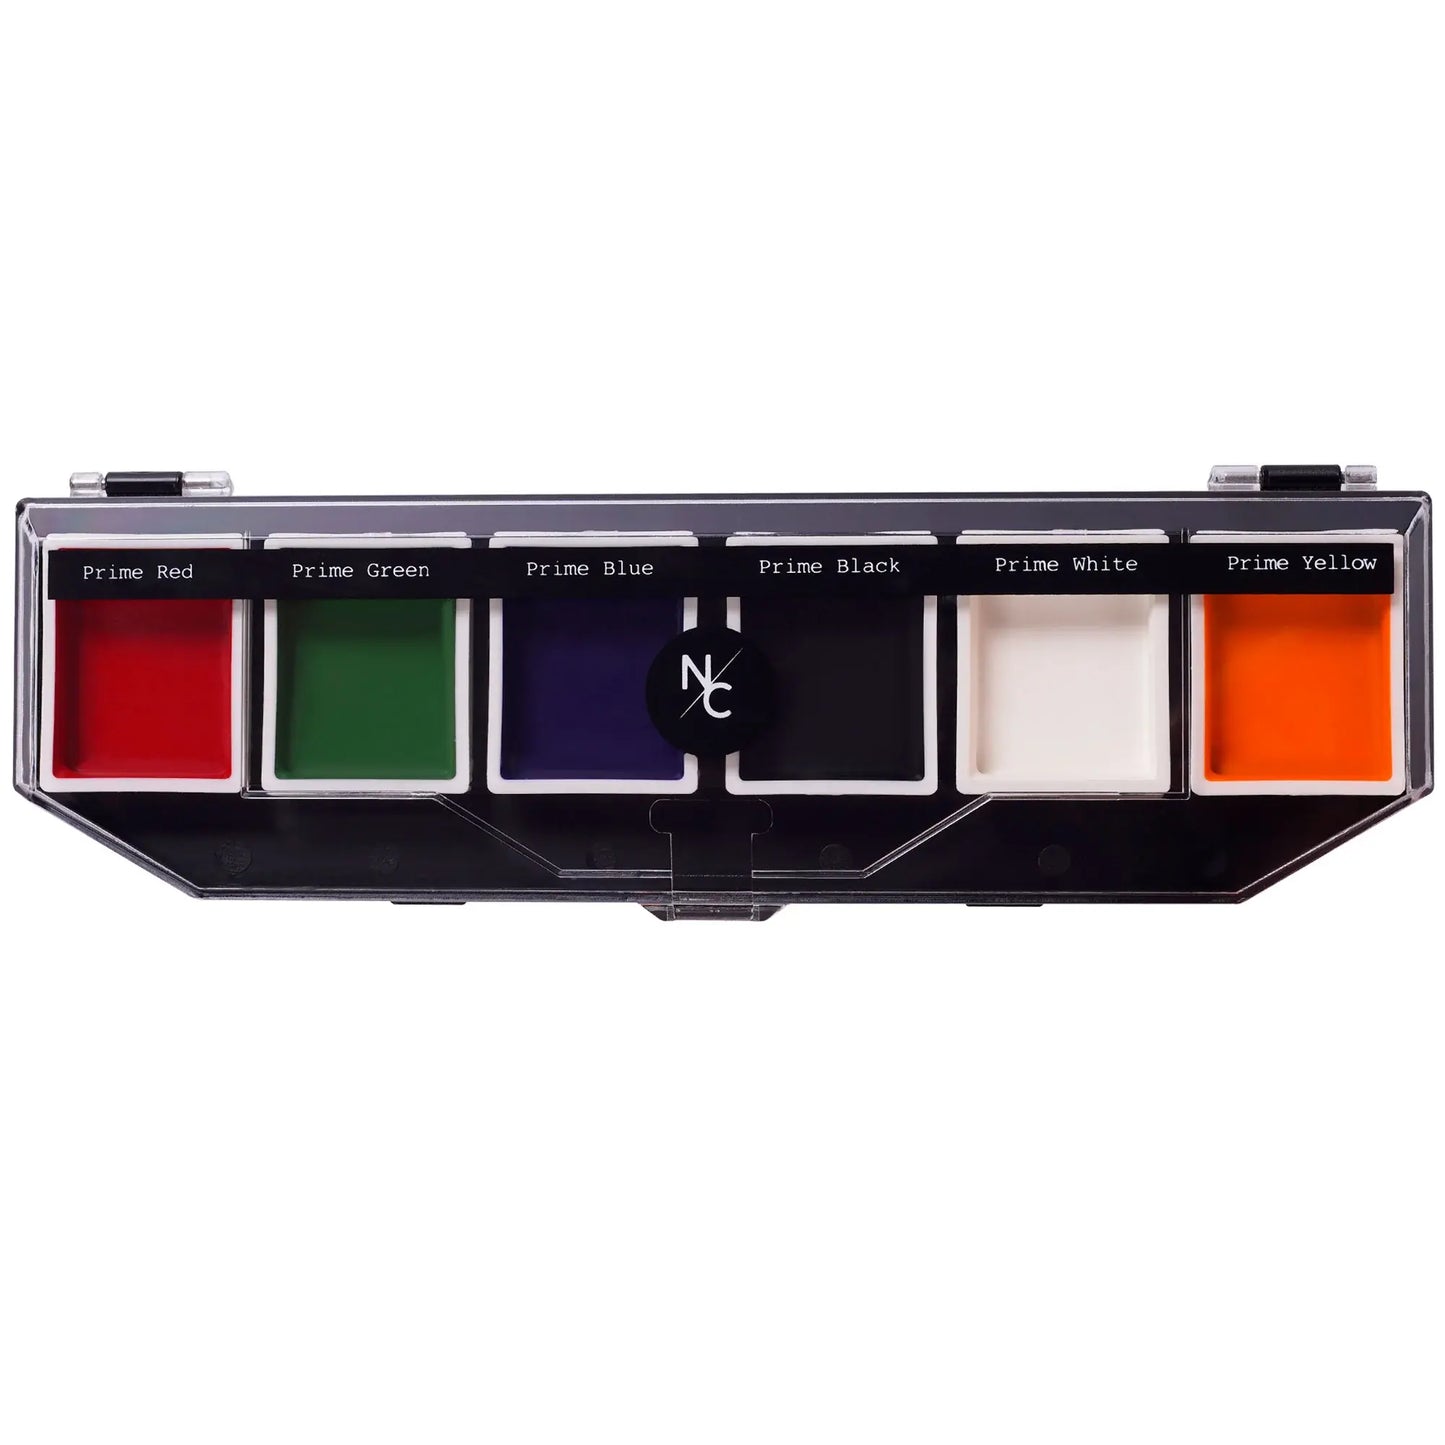 6 Color On Camera Primary Alcohol Activated Makeup Palette